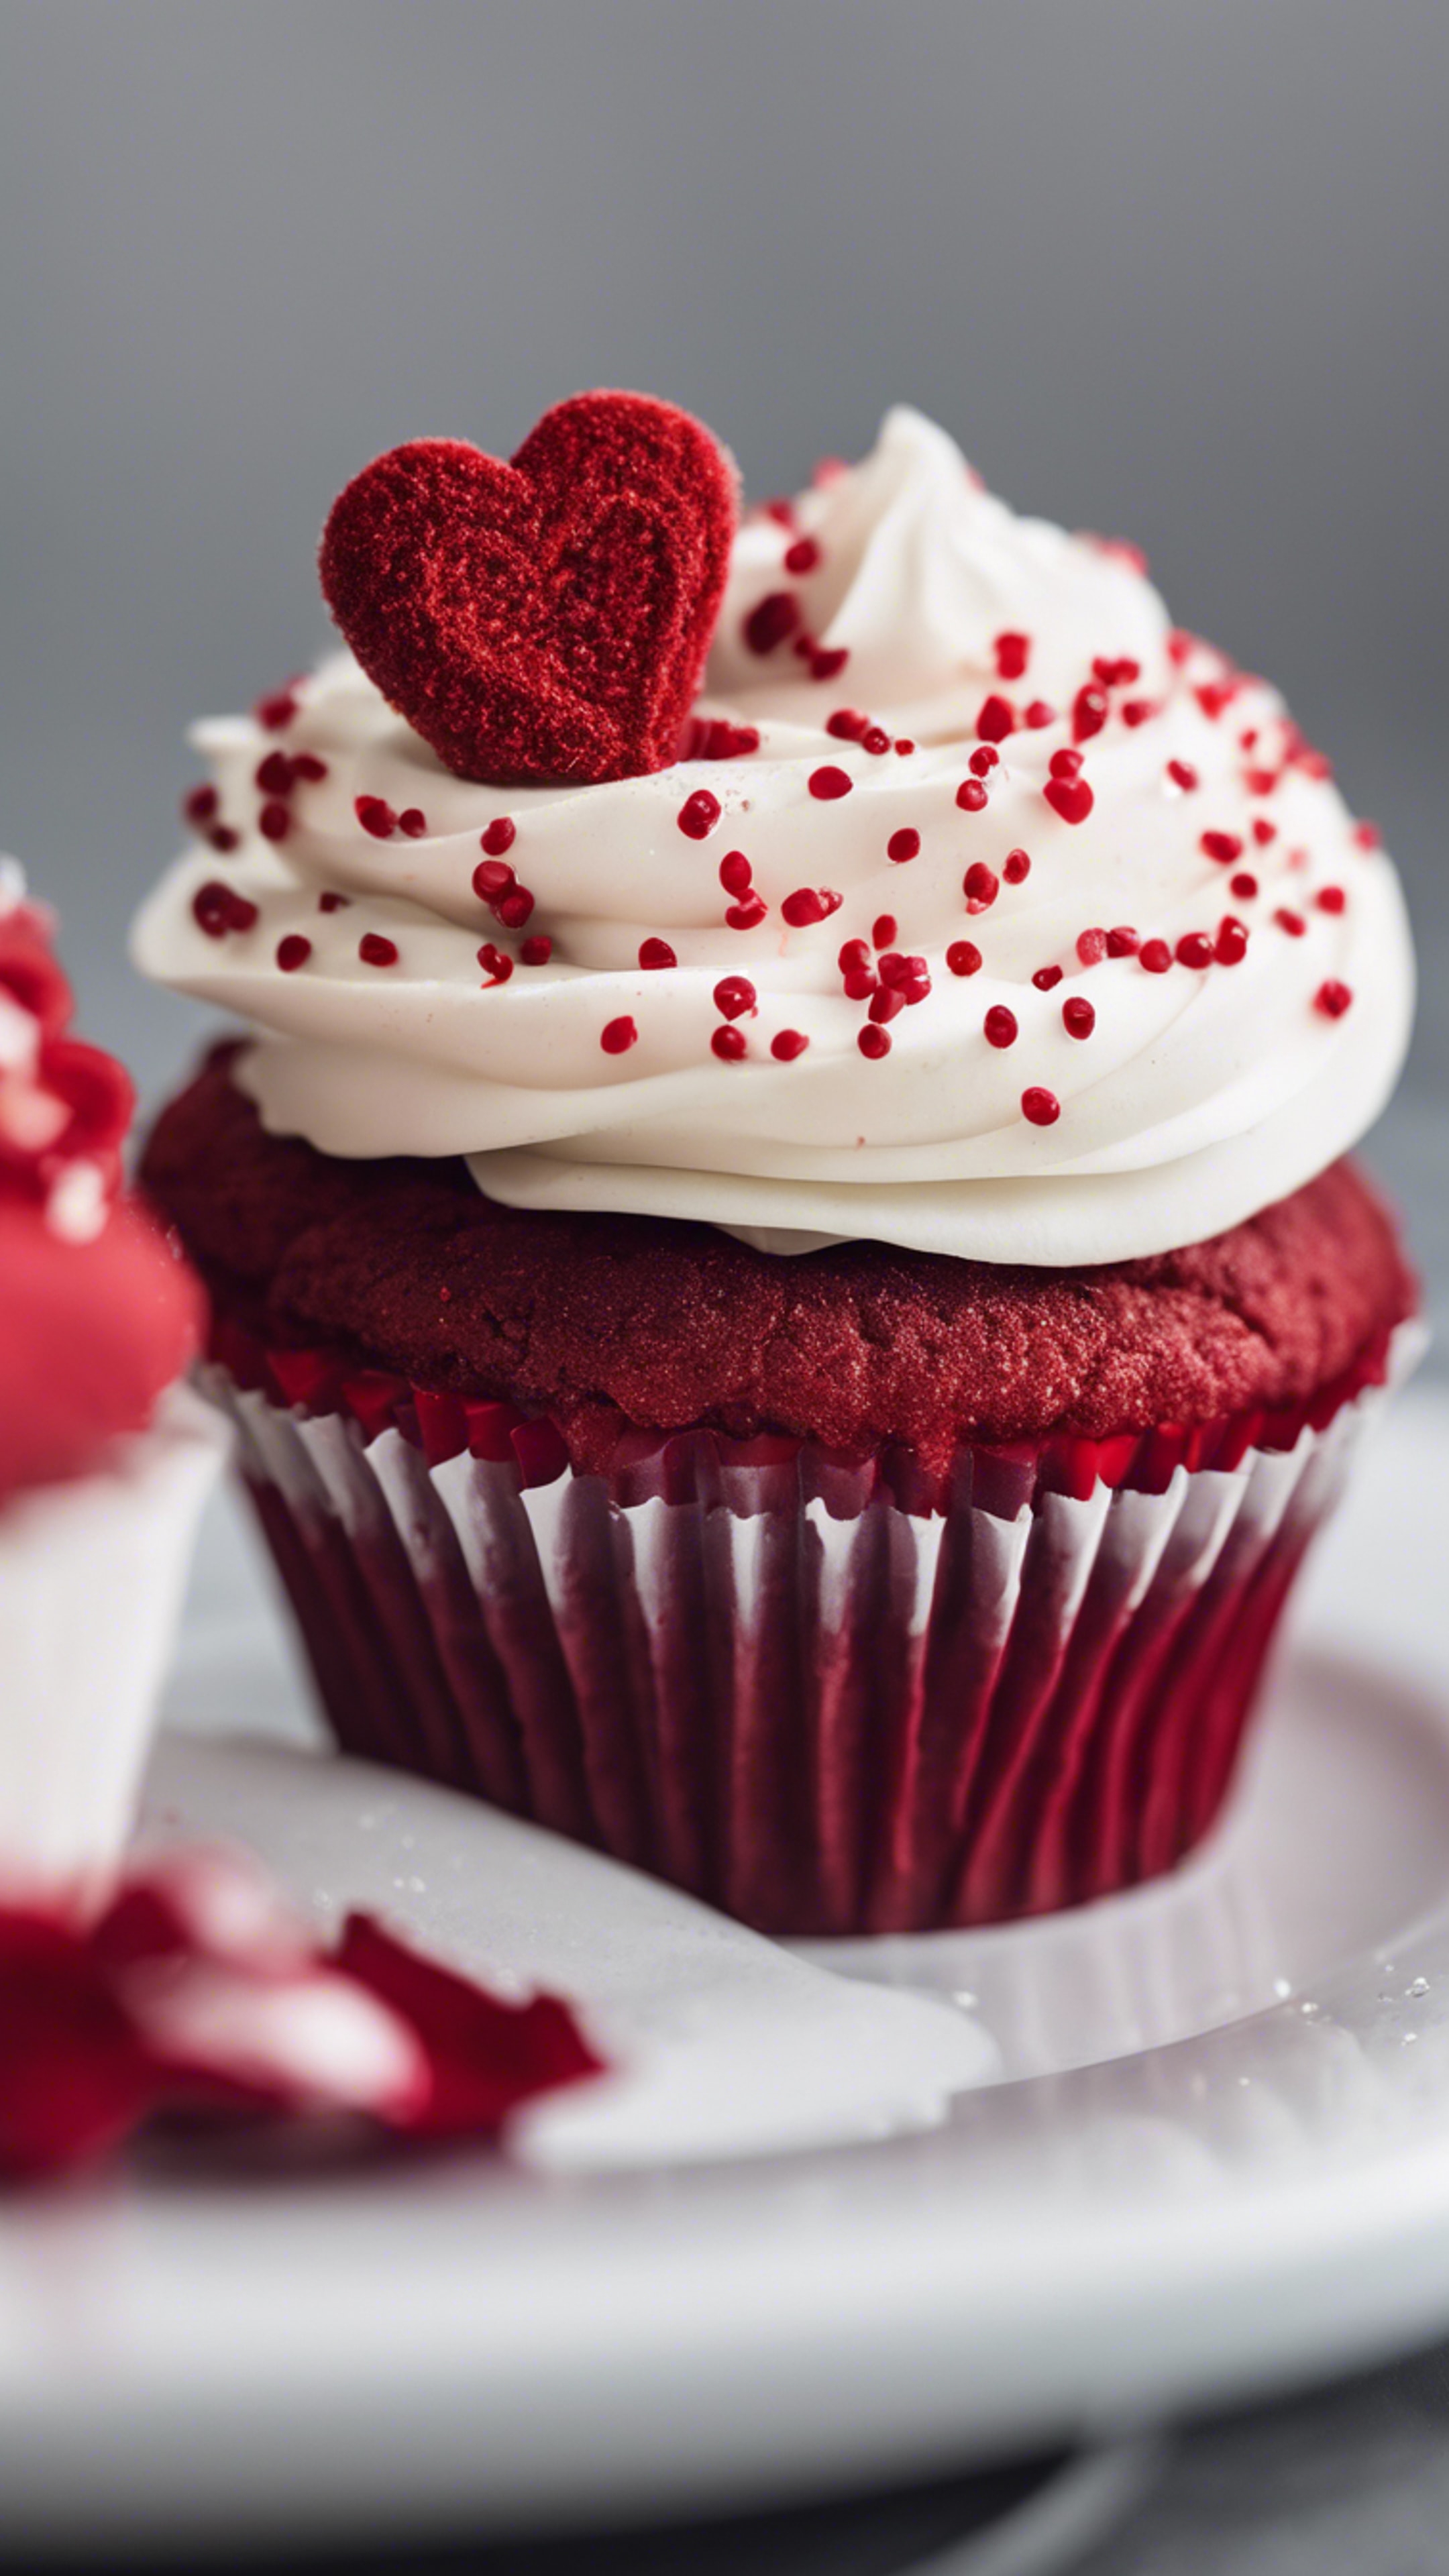 A red velvet cupcake with a heart-shaped sprinkle on top, presented on a white ceramic plate. ورق الجدران[2d98083c137b4c3e8f81]